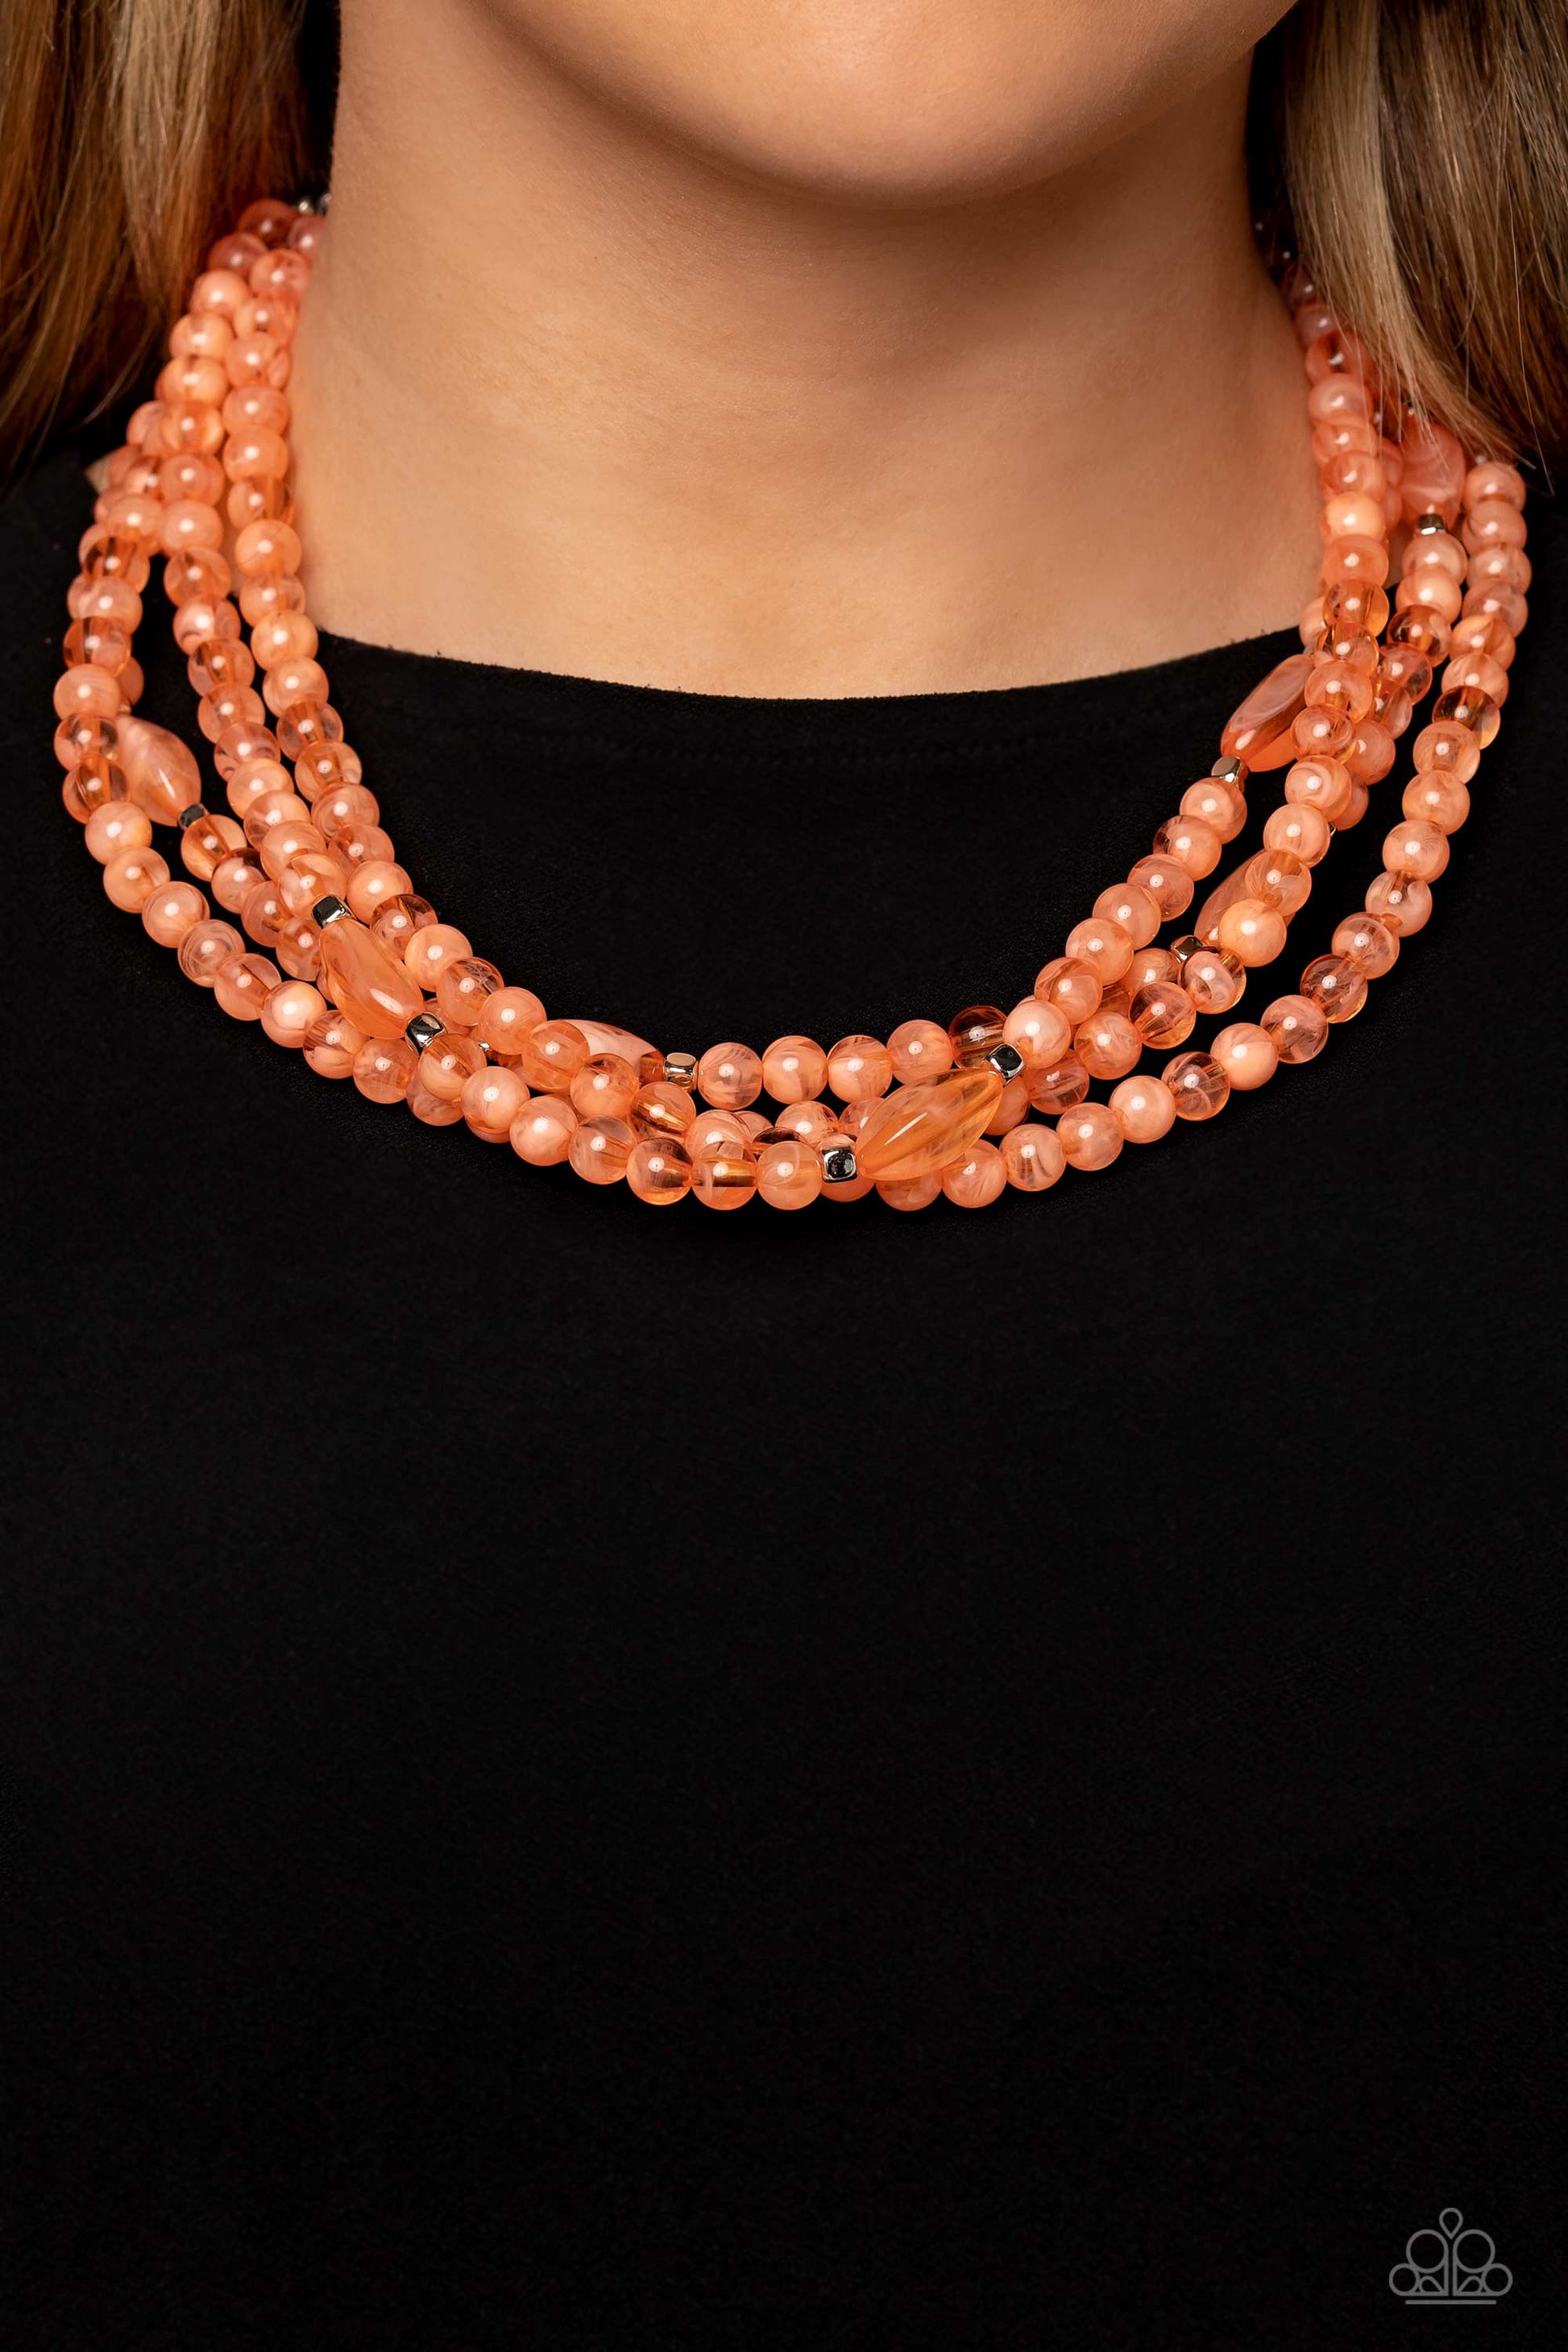 Paparazzi Accessories Layered Lass - Orange Varying in shape and color, a collection of milky round and oval Peach Pink beads are threaded along invisible wires below the collar. Shiny silver cube beads are sprinkled throughout the strands, adding hints o